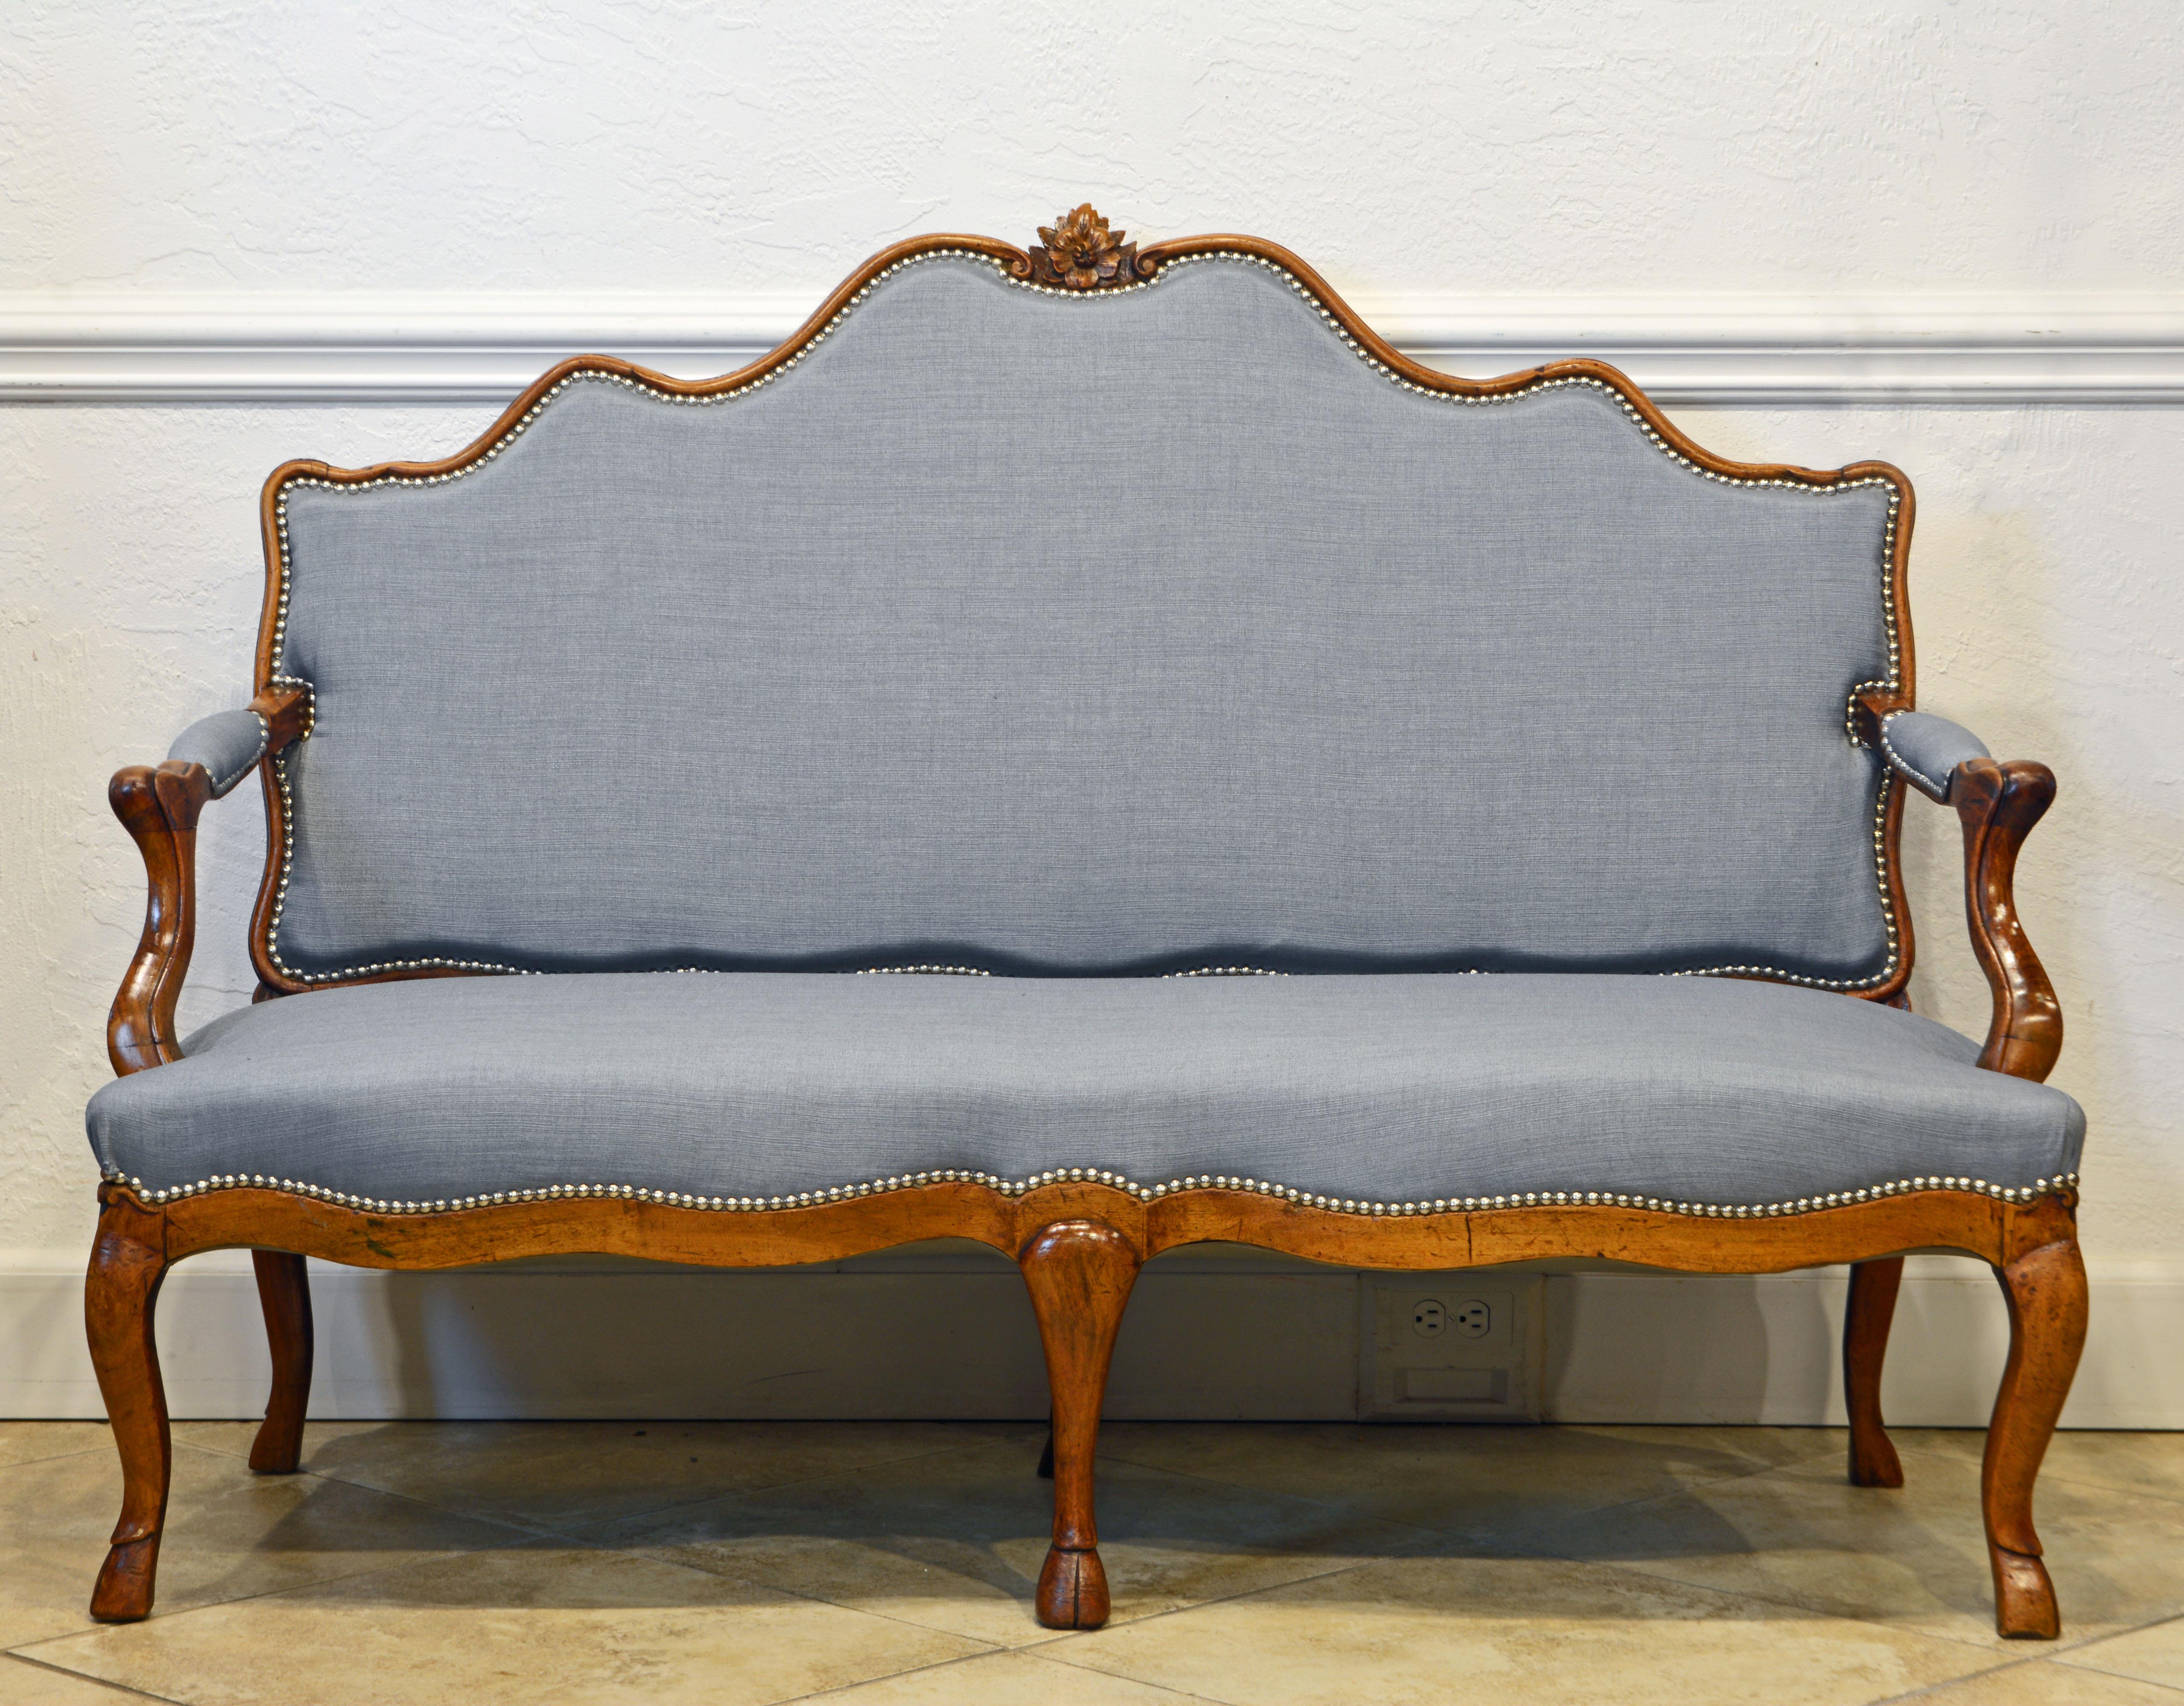 This shapely French Louis XV canapé or settee feature a carved padded serpentine back, partly padded scrolled arm rests and an upholstered seat with scalloped apron resting on six well carved cabriole legs ending in hoof feet, 18th century. This